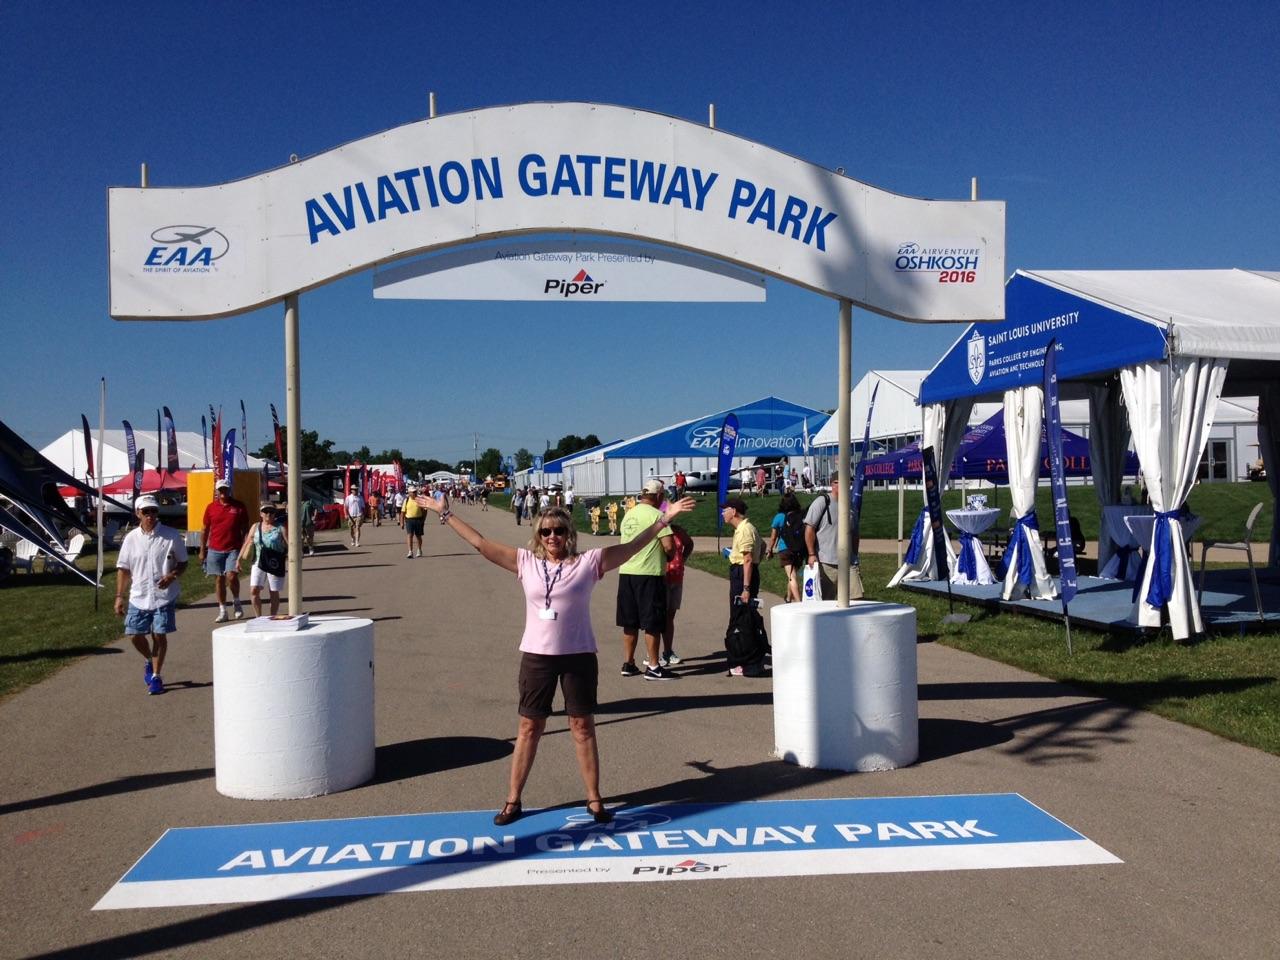 Mary Ann Harness welcomes visitors to Aviation Gateway Park.